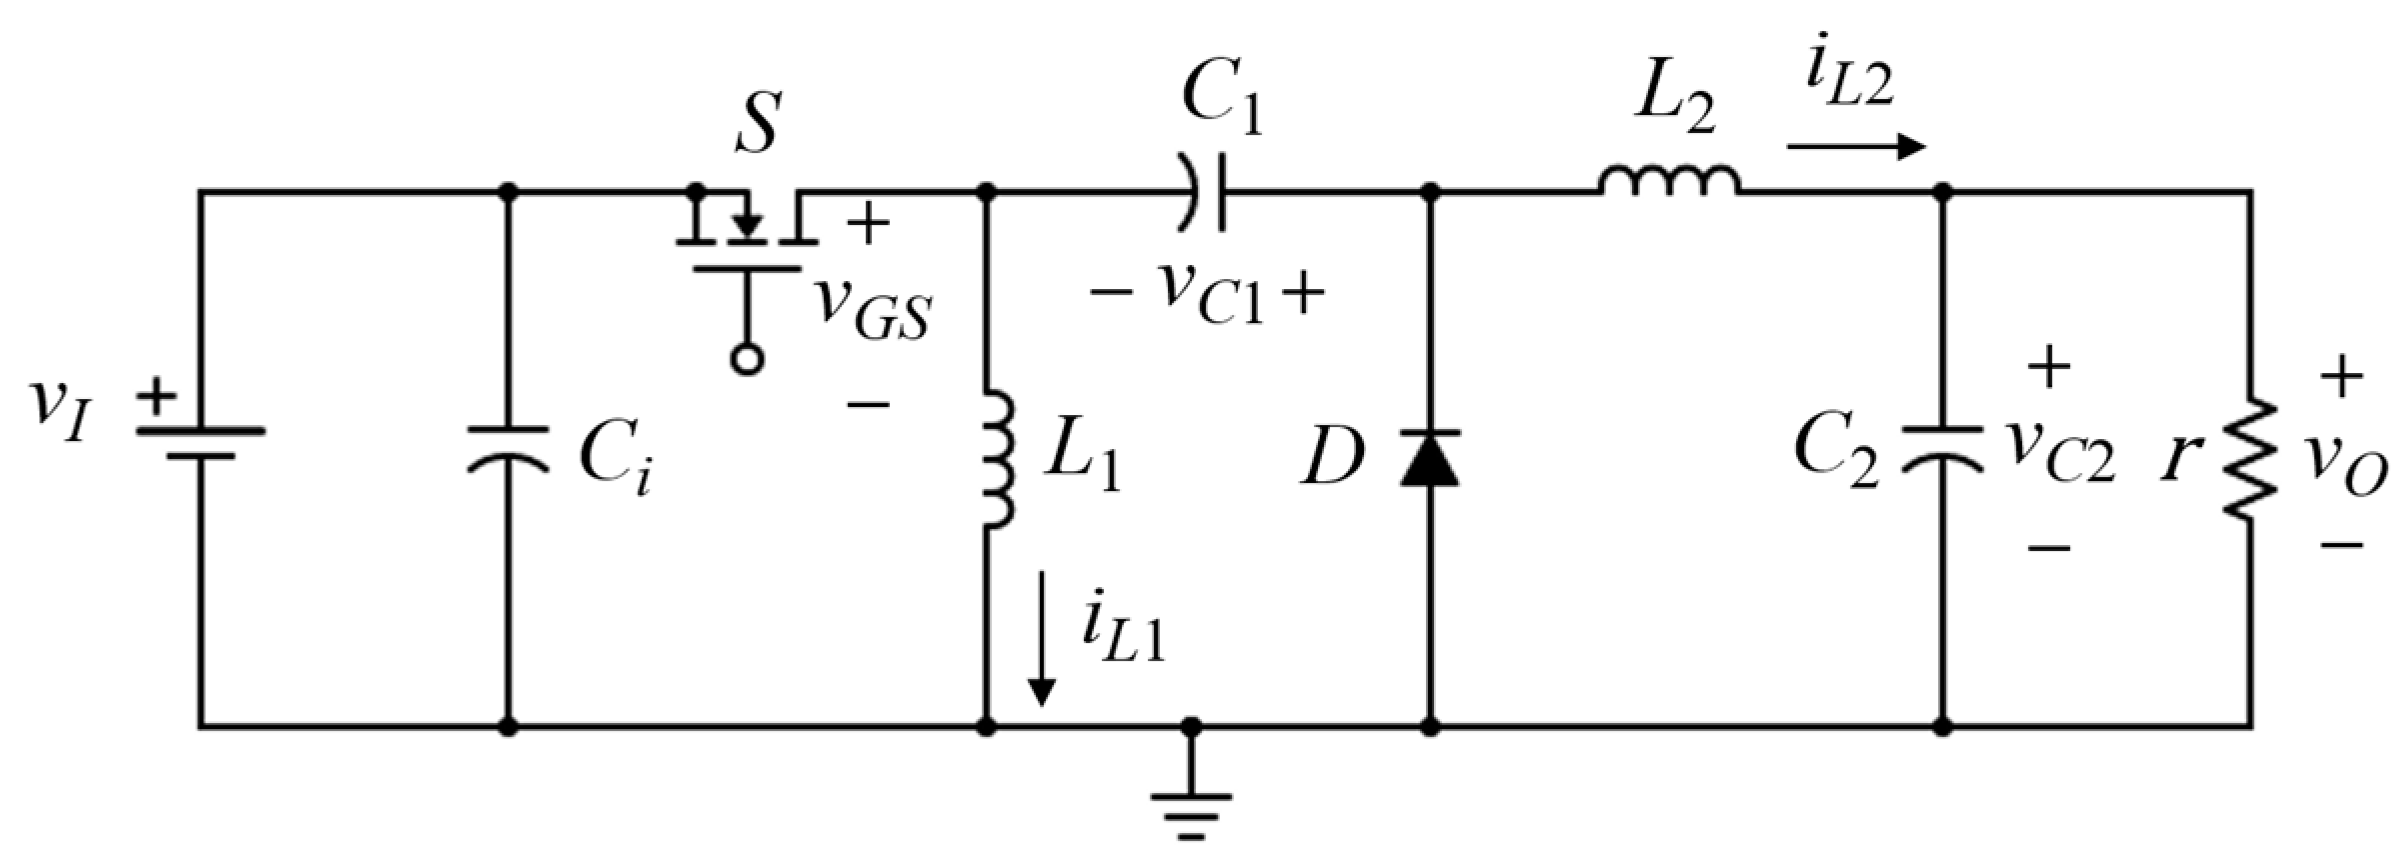 Prototype of step-up voltage converter with discrete components